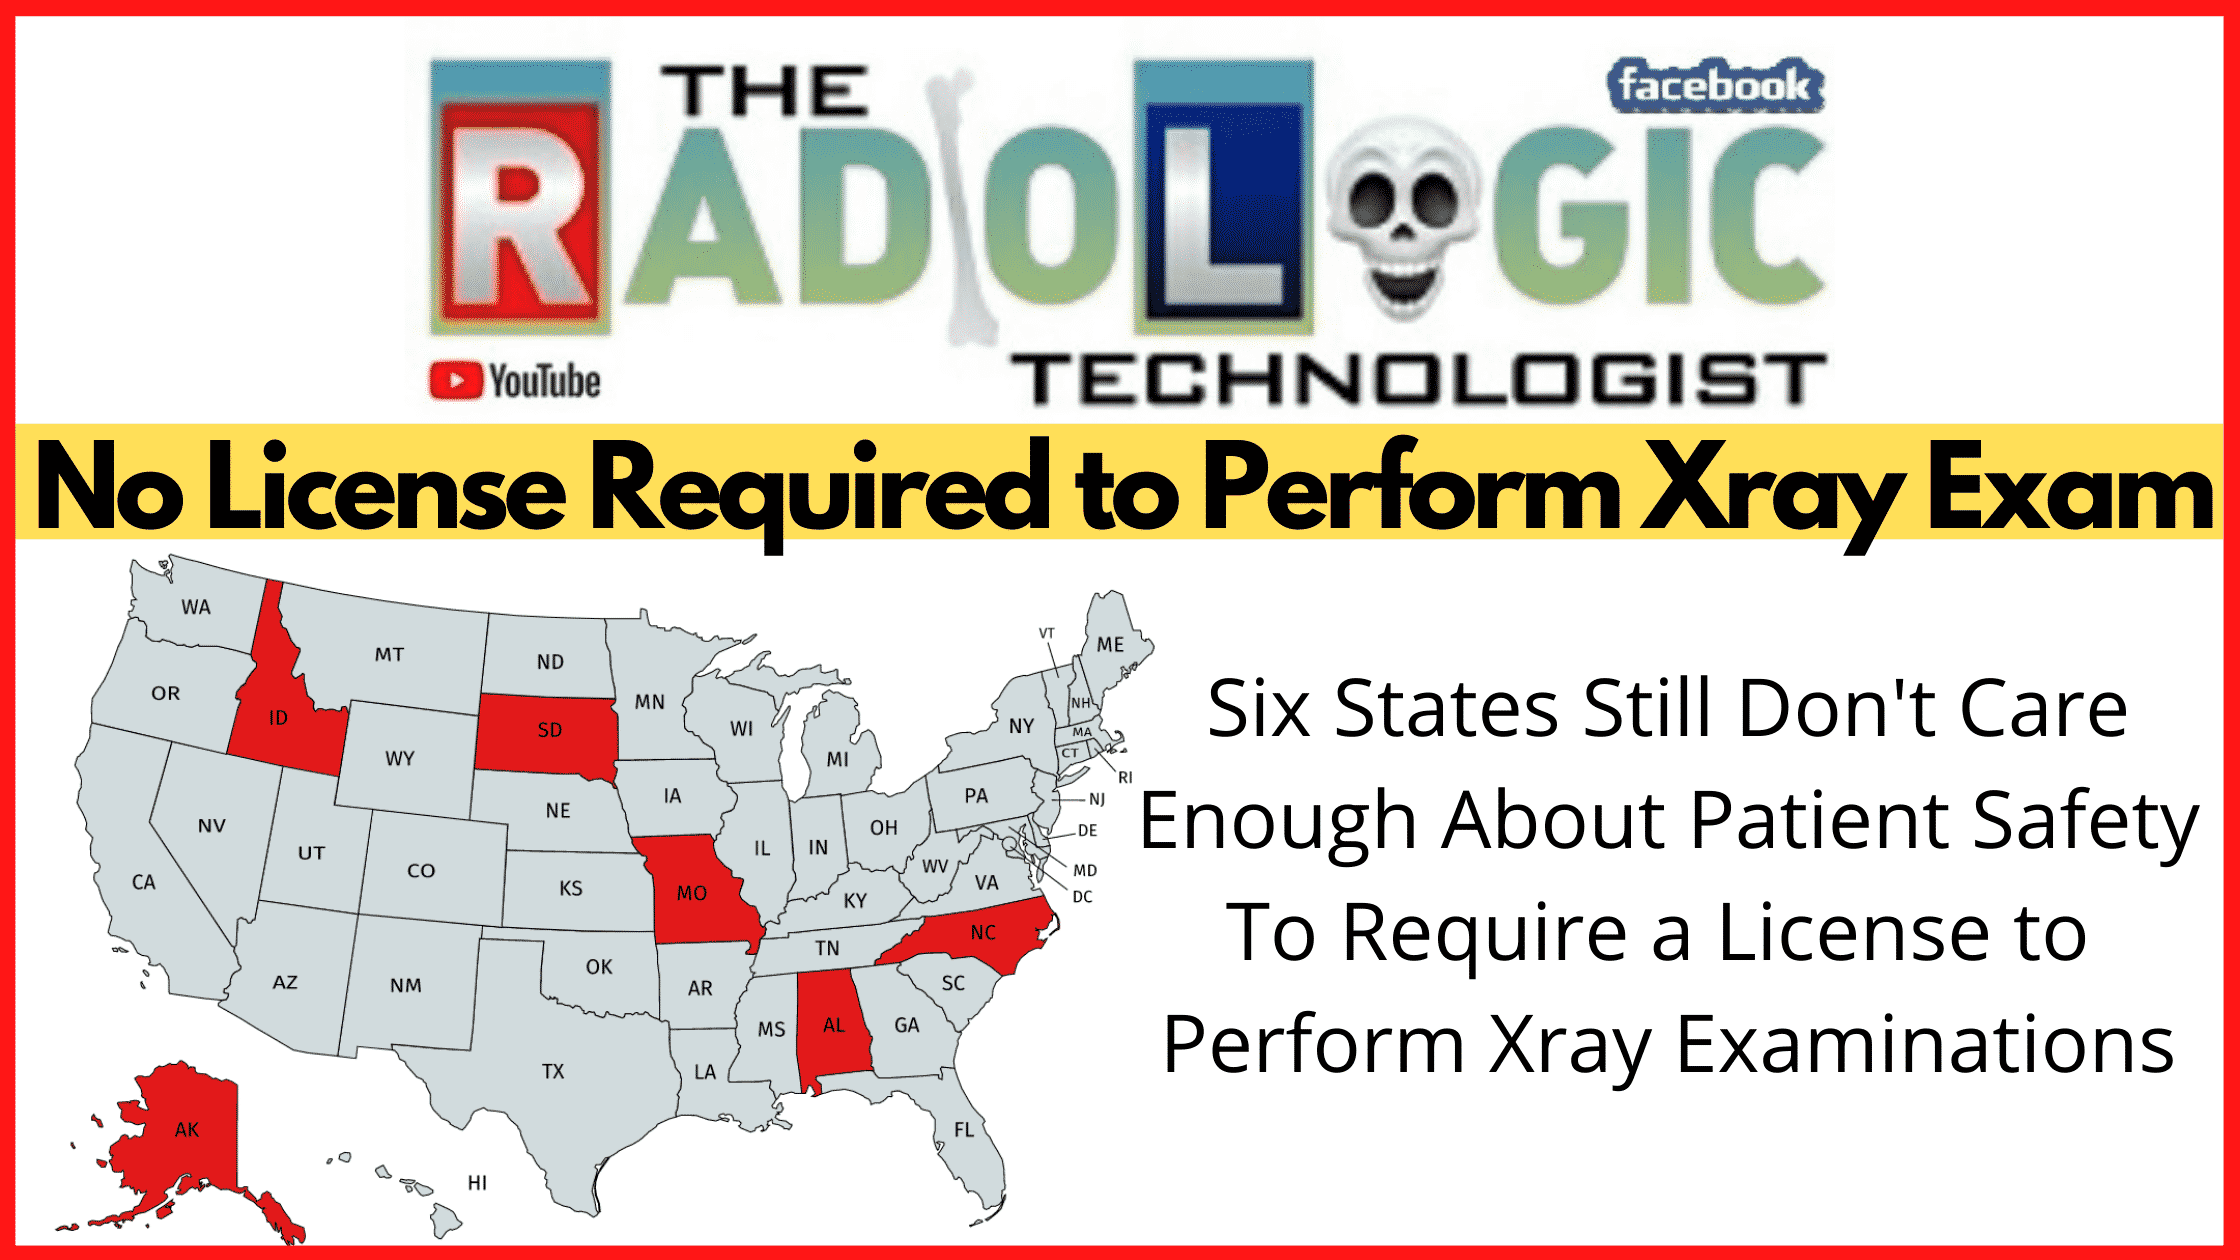 States That Do Not Require Licensure to Perform Xray Examinations